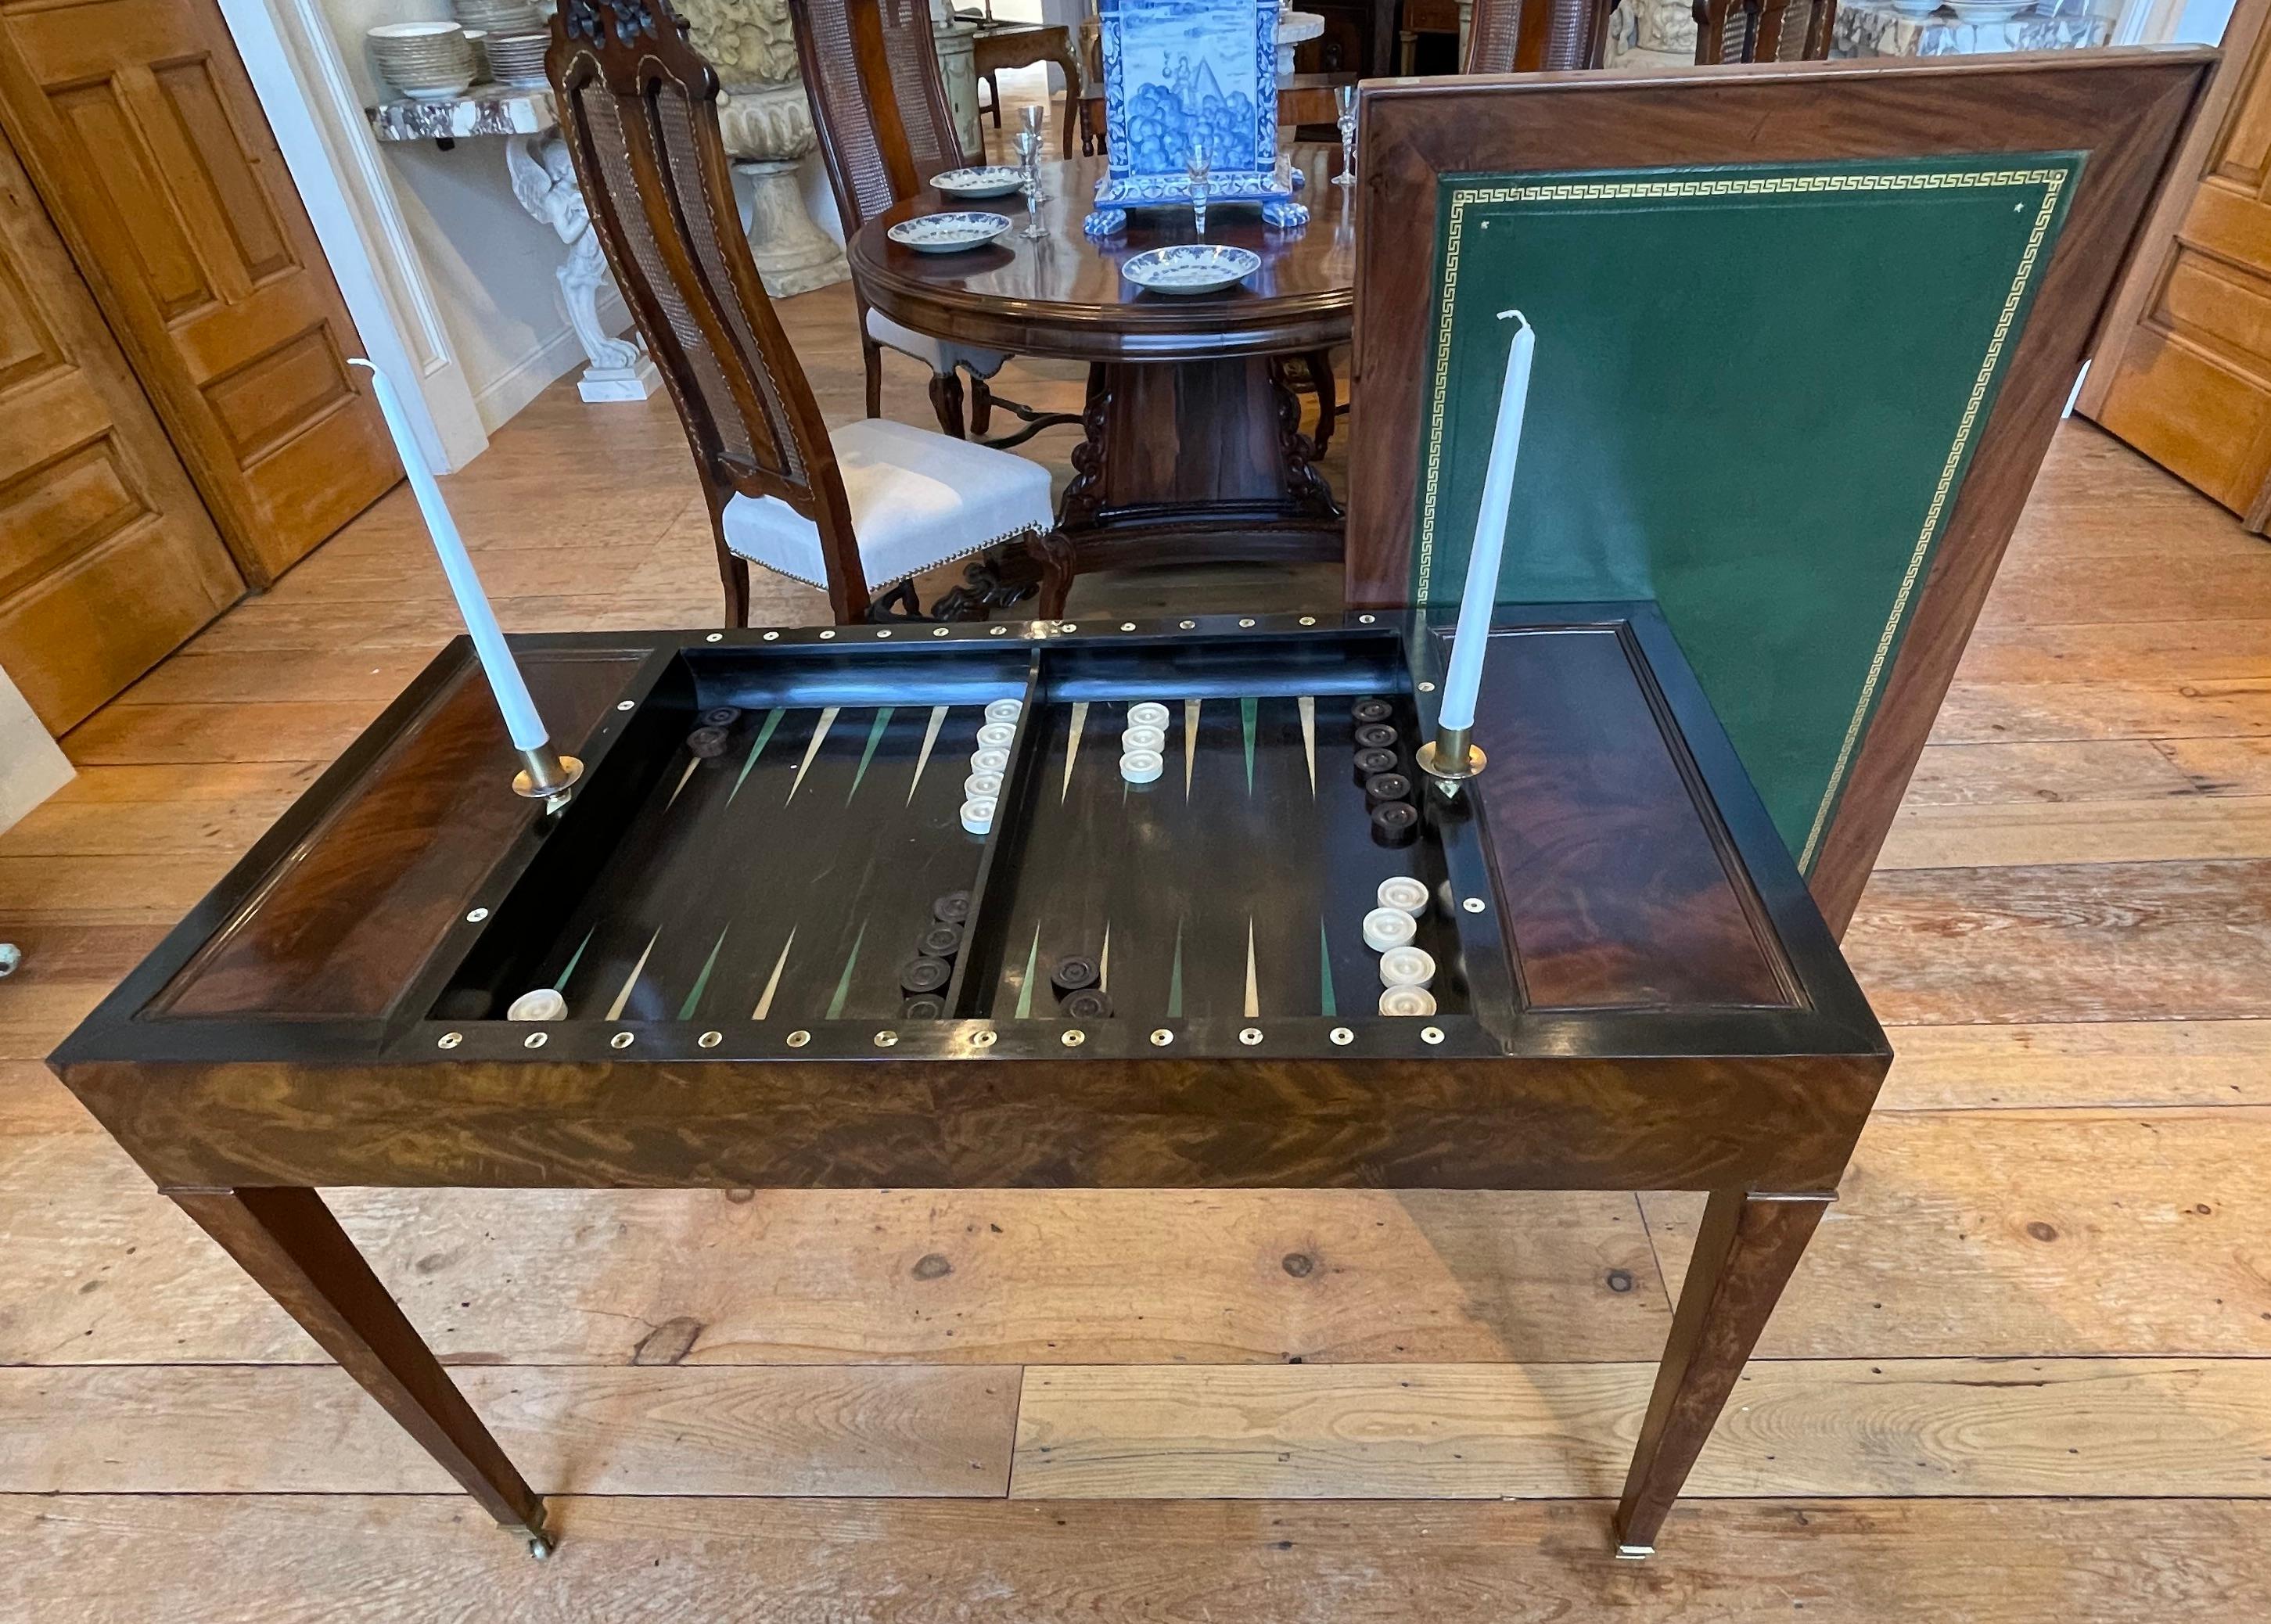 Period French Empire Mahogany Tric Trac Games Table.  Inlaid Backgammon Well.  Original Removable Top with leather on one side for writing and felt on reverse for card playing.  Original draught pieces.  Candleholders.

A beautiful piece 